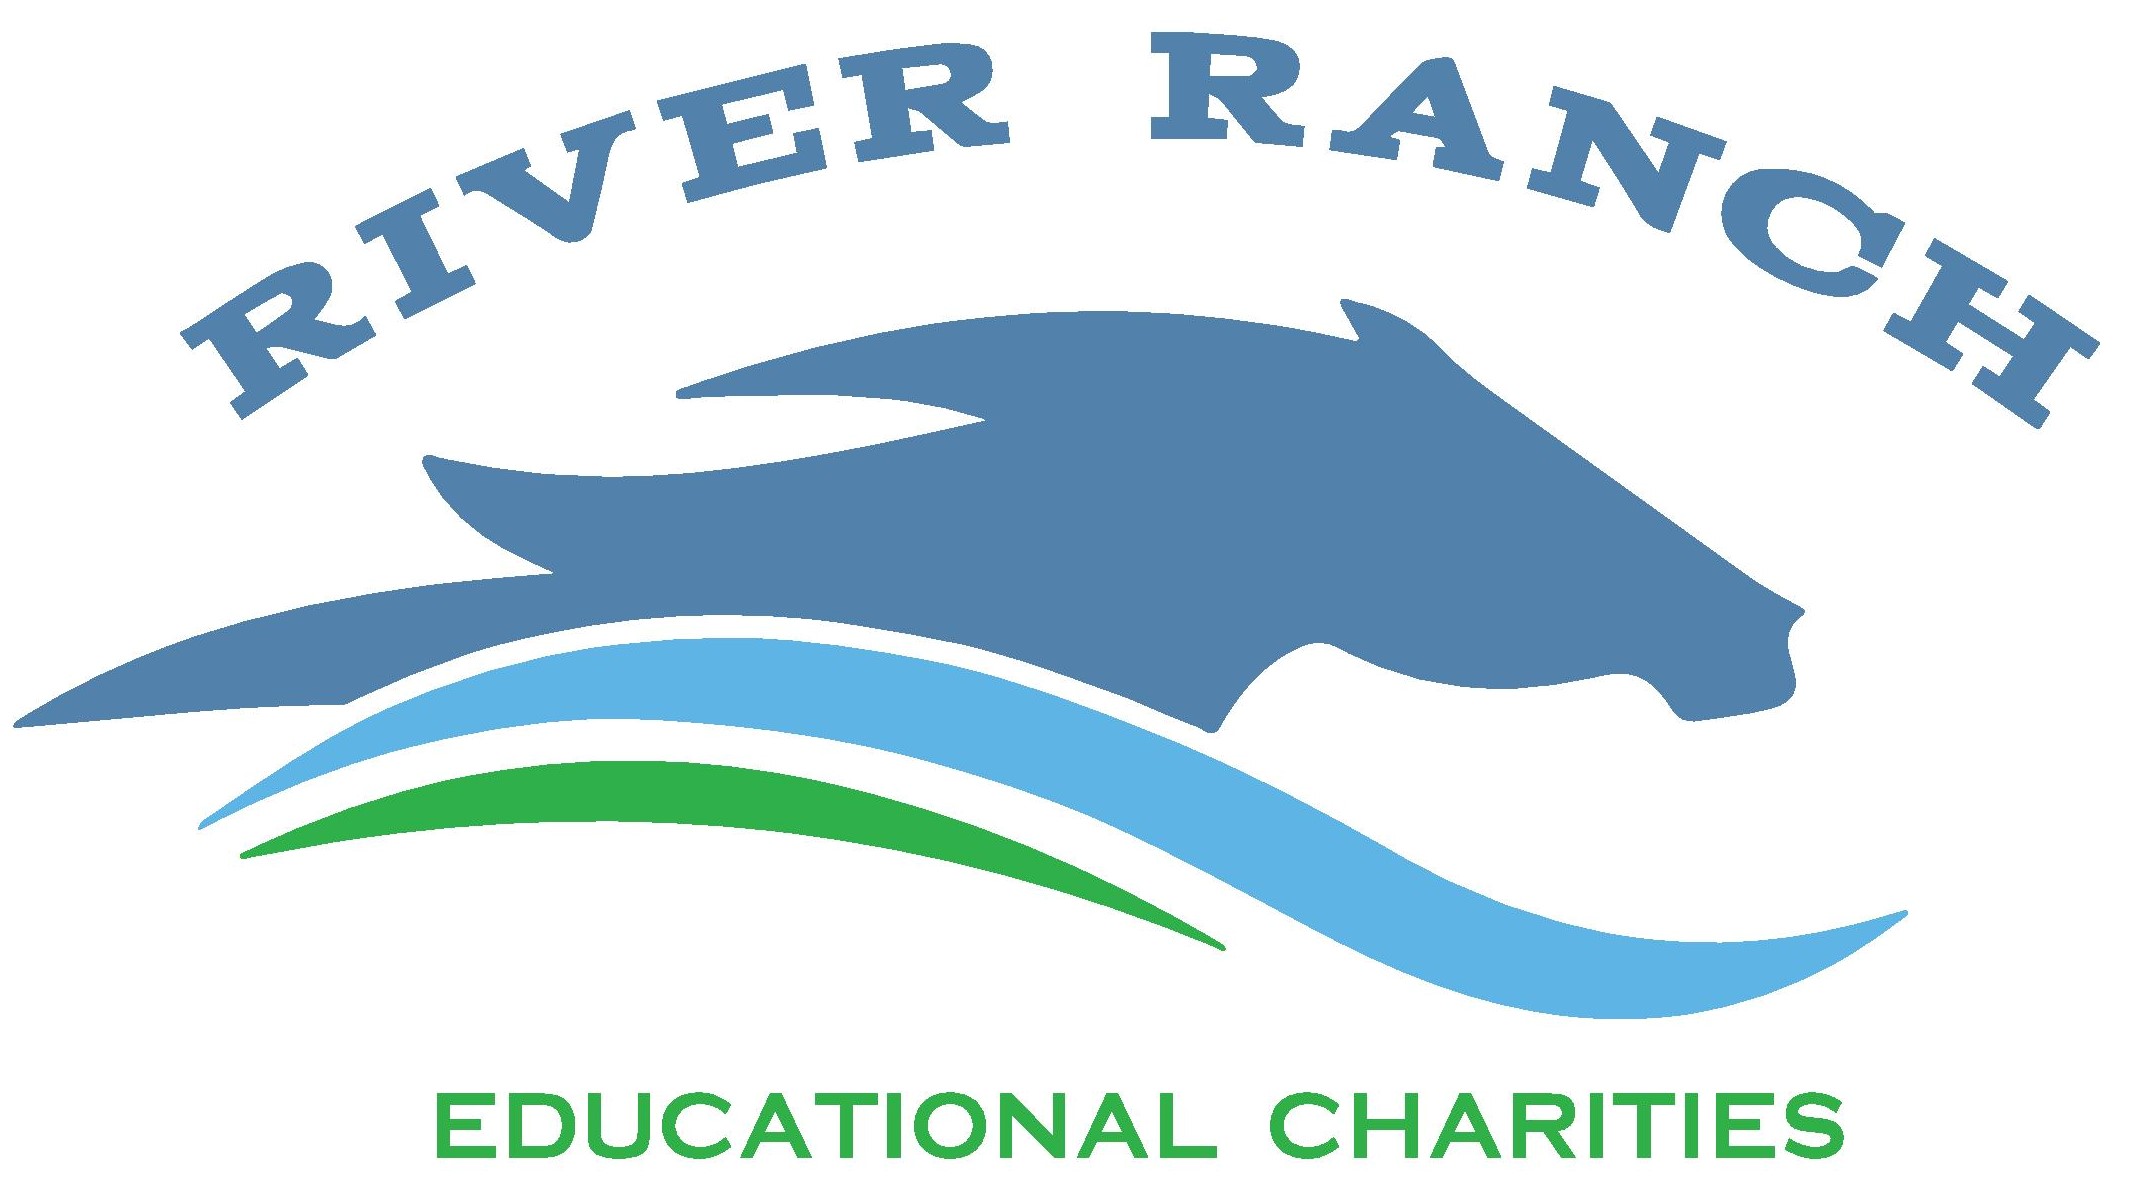 River Ranch at Texas Horse Park | GetYourGuide Supplier